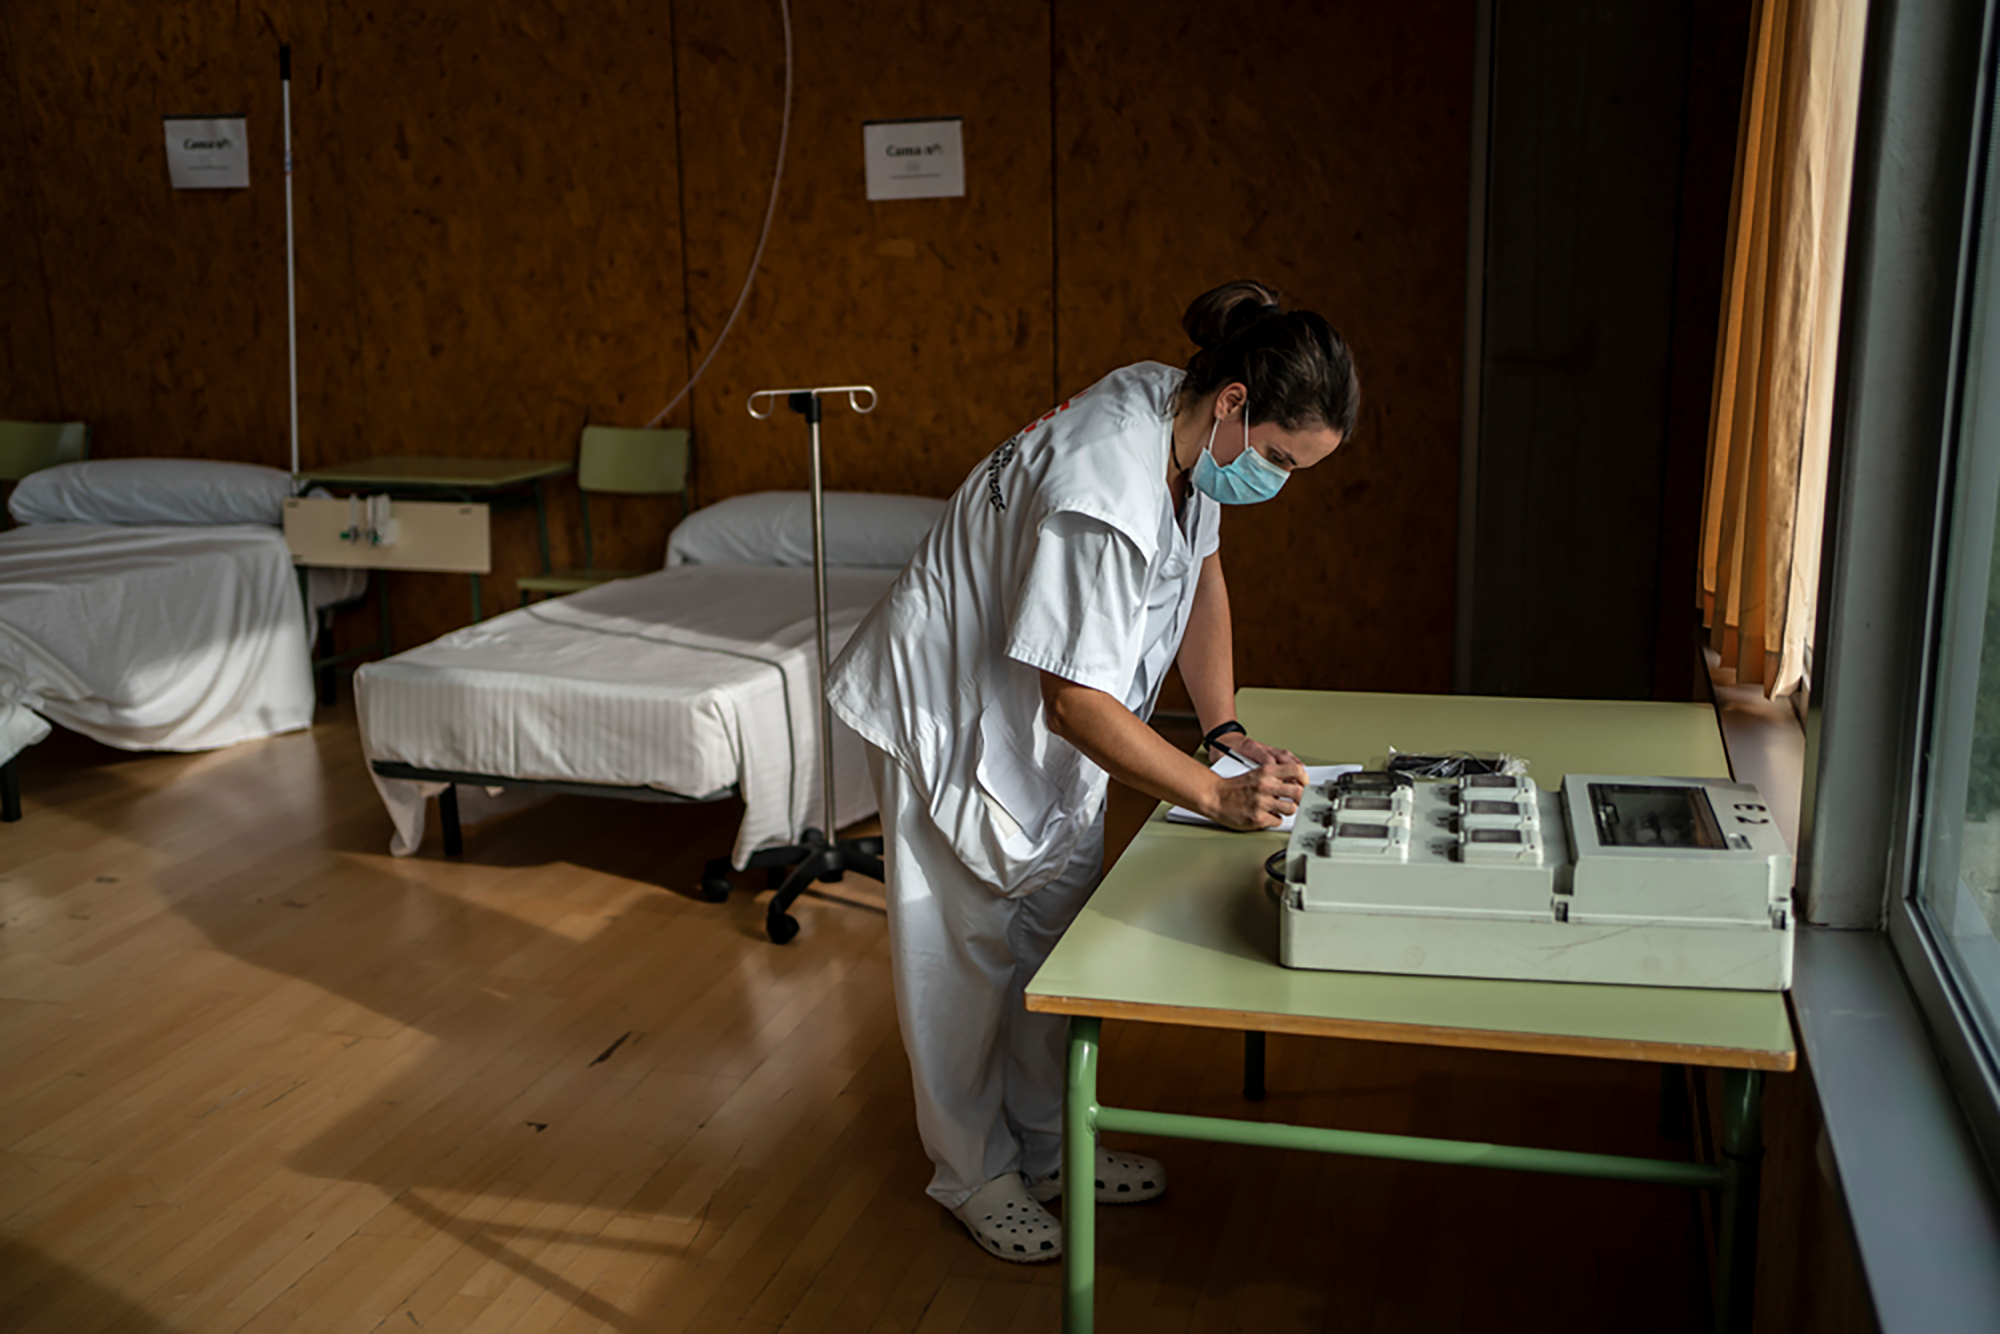 An MSF nurse works in a temporary hospital, set up for COVID-19 patients, in Alcalá de Henares hospital. Madrid, Spain, April 2020. © Olmo Calvo/MSF